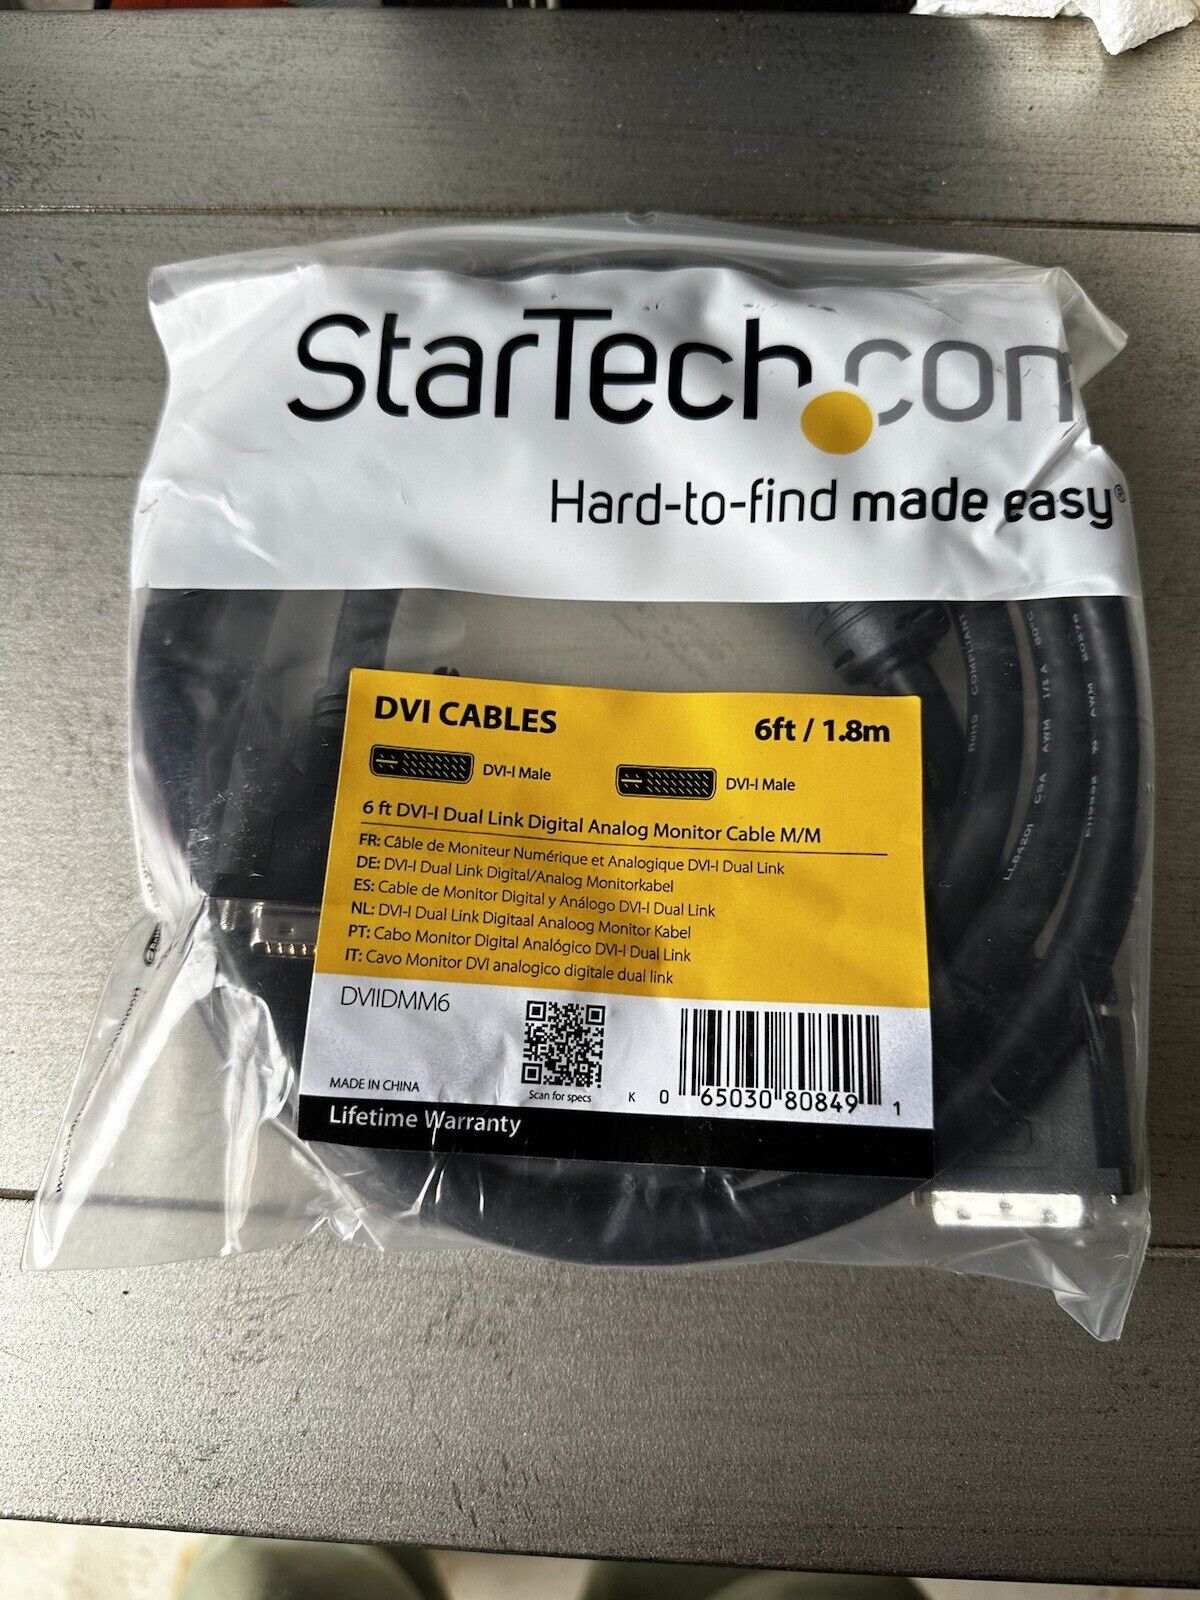 1 Startech 6 ft DVI-D Dual Link Monitor Cable / Wire - Connection M/M